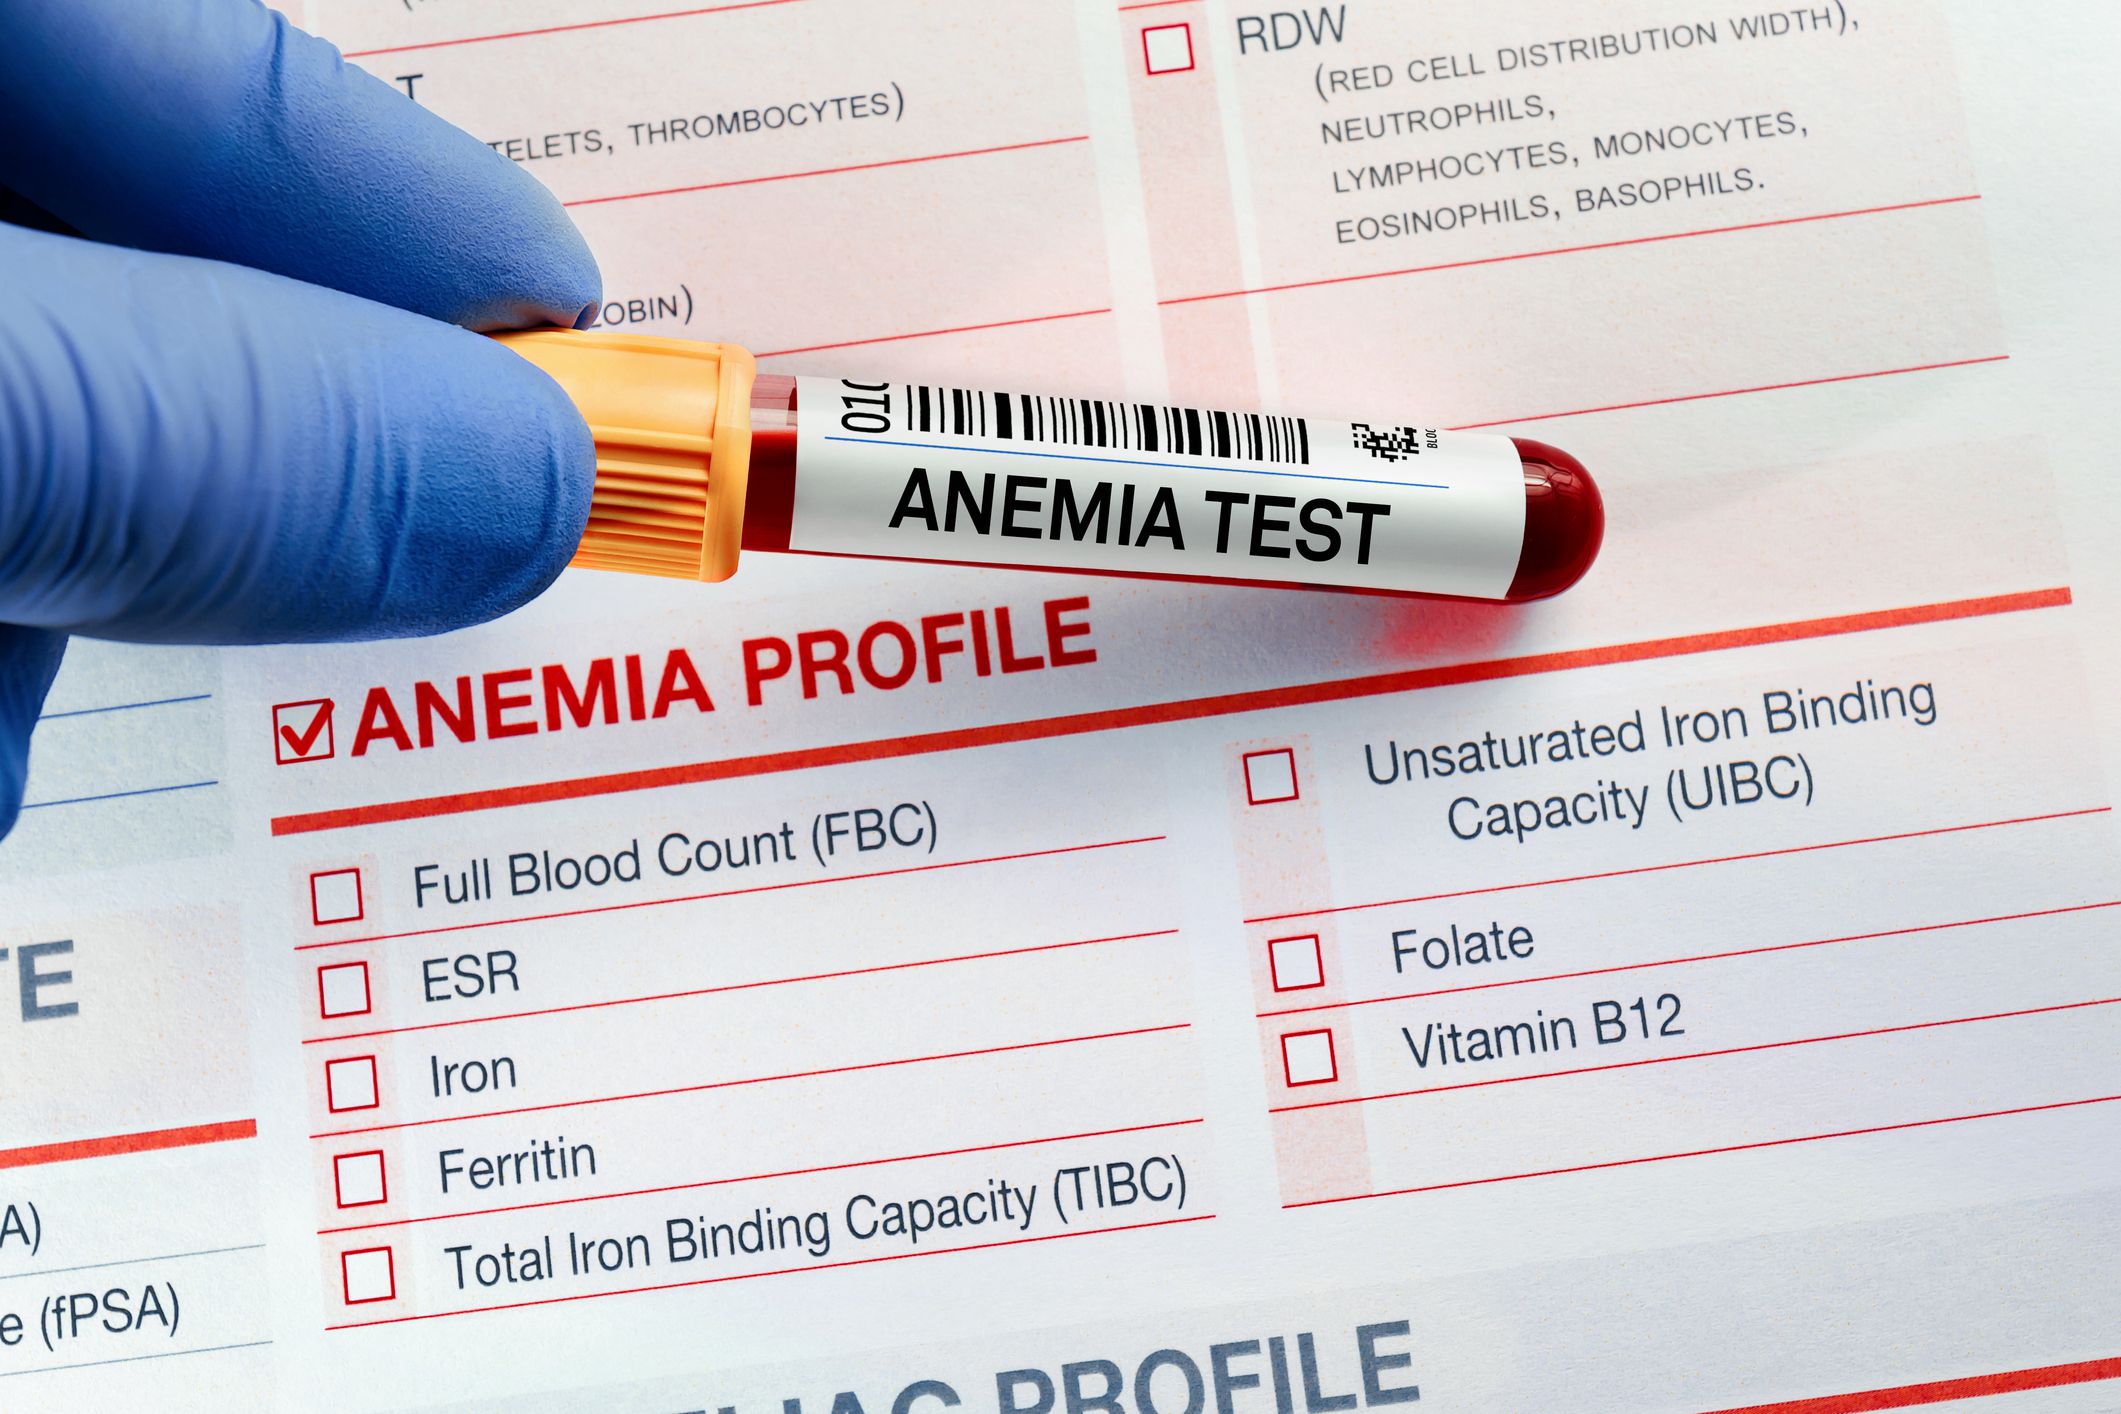 <p><a href="https://www.mayoclinic.org/diseases-conditions/vitamin-deficiency-anemia/symptoms-causes/syc-20355025">Anemia symptoms</a> include fatigue, shortness of breath, dizziness, irregular heartbeat, muscle weakness, pale skin, and numbness in extremities. The cause is unhealthy red blood cells that are too large and don’t carry oxygen as efficiently as they should. Red blood cell development requires vitamin B12 and folate, which can be added to your diet through supplements.</p>